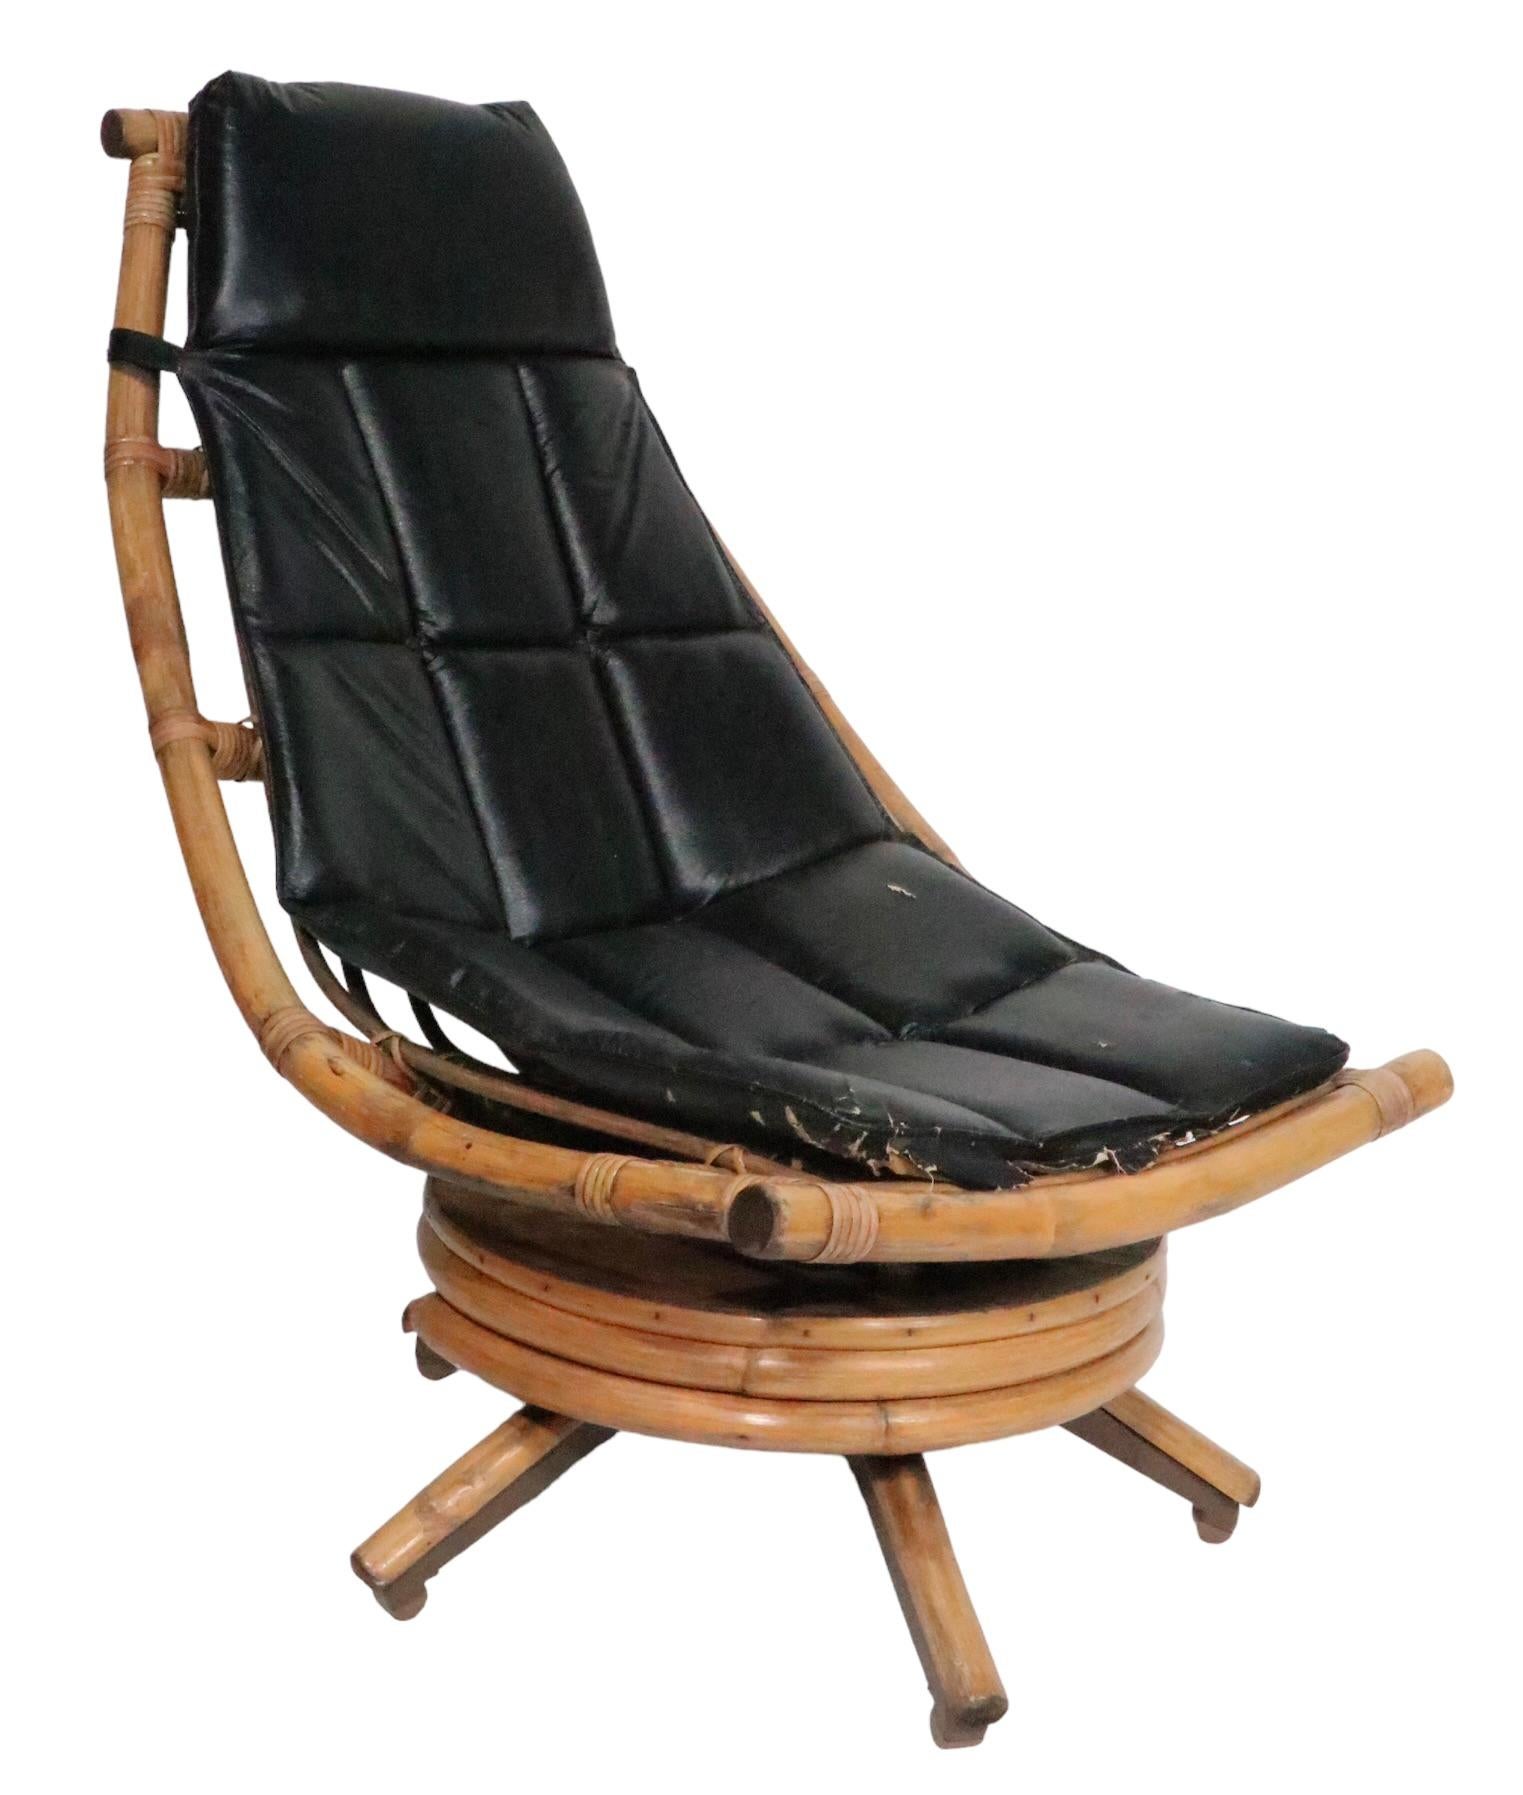 Midcentury Swivel Tilt Bamboo Lounge Chaise Chair, circa 1950/ 1960s For Sale 5